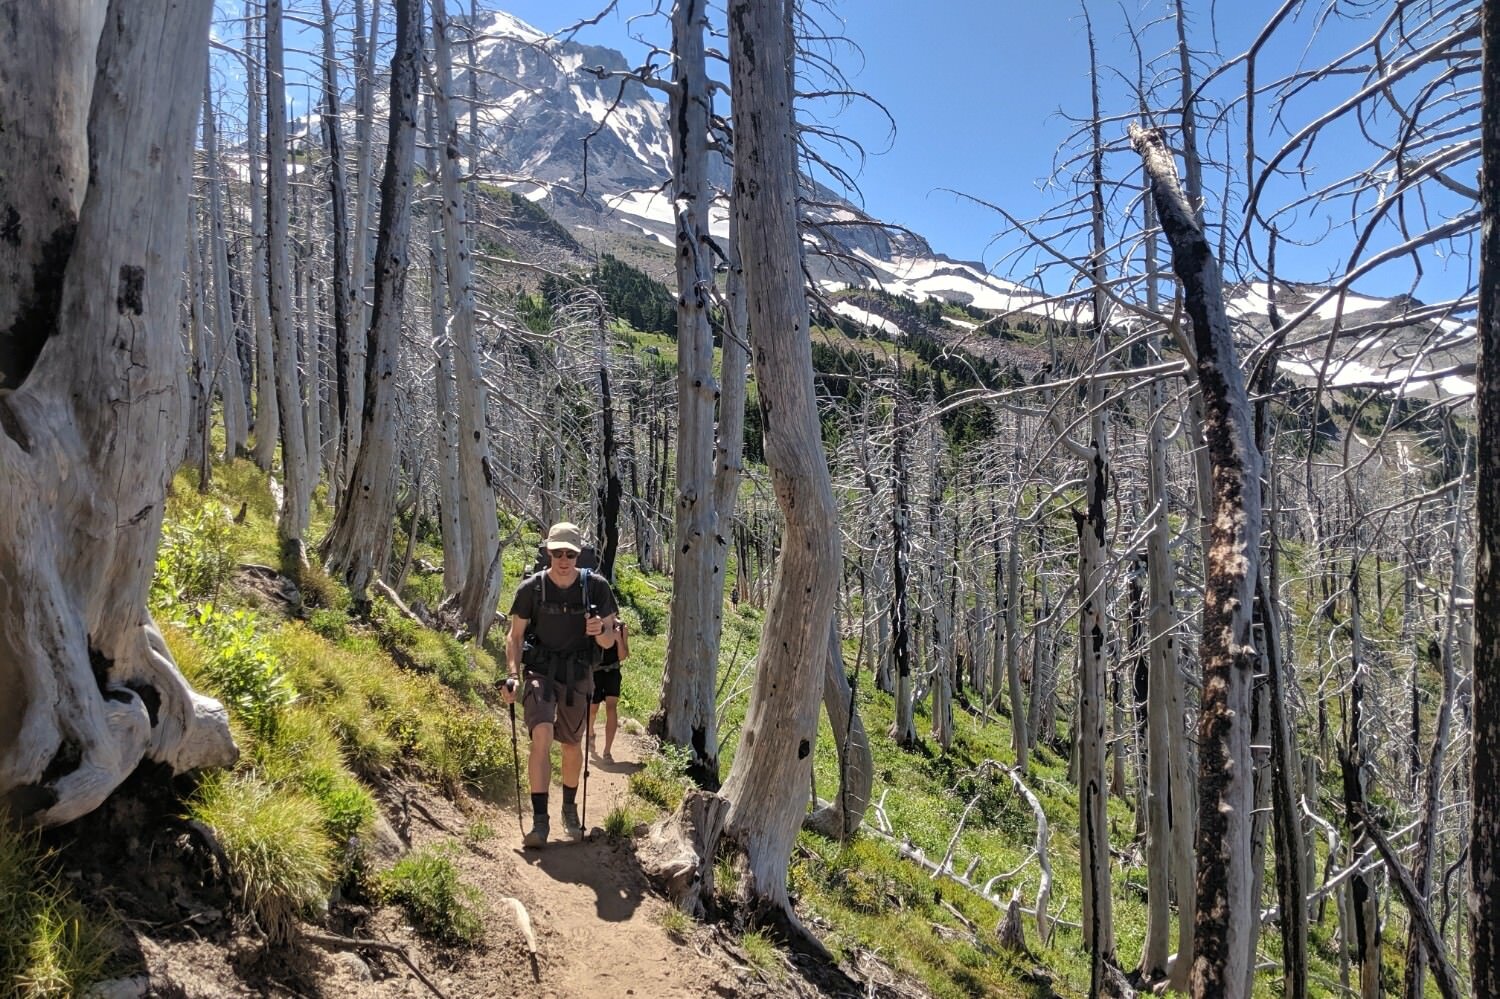 Trekking poles can help provide some forward momentum for long uphill slogs.